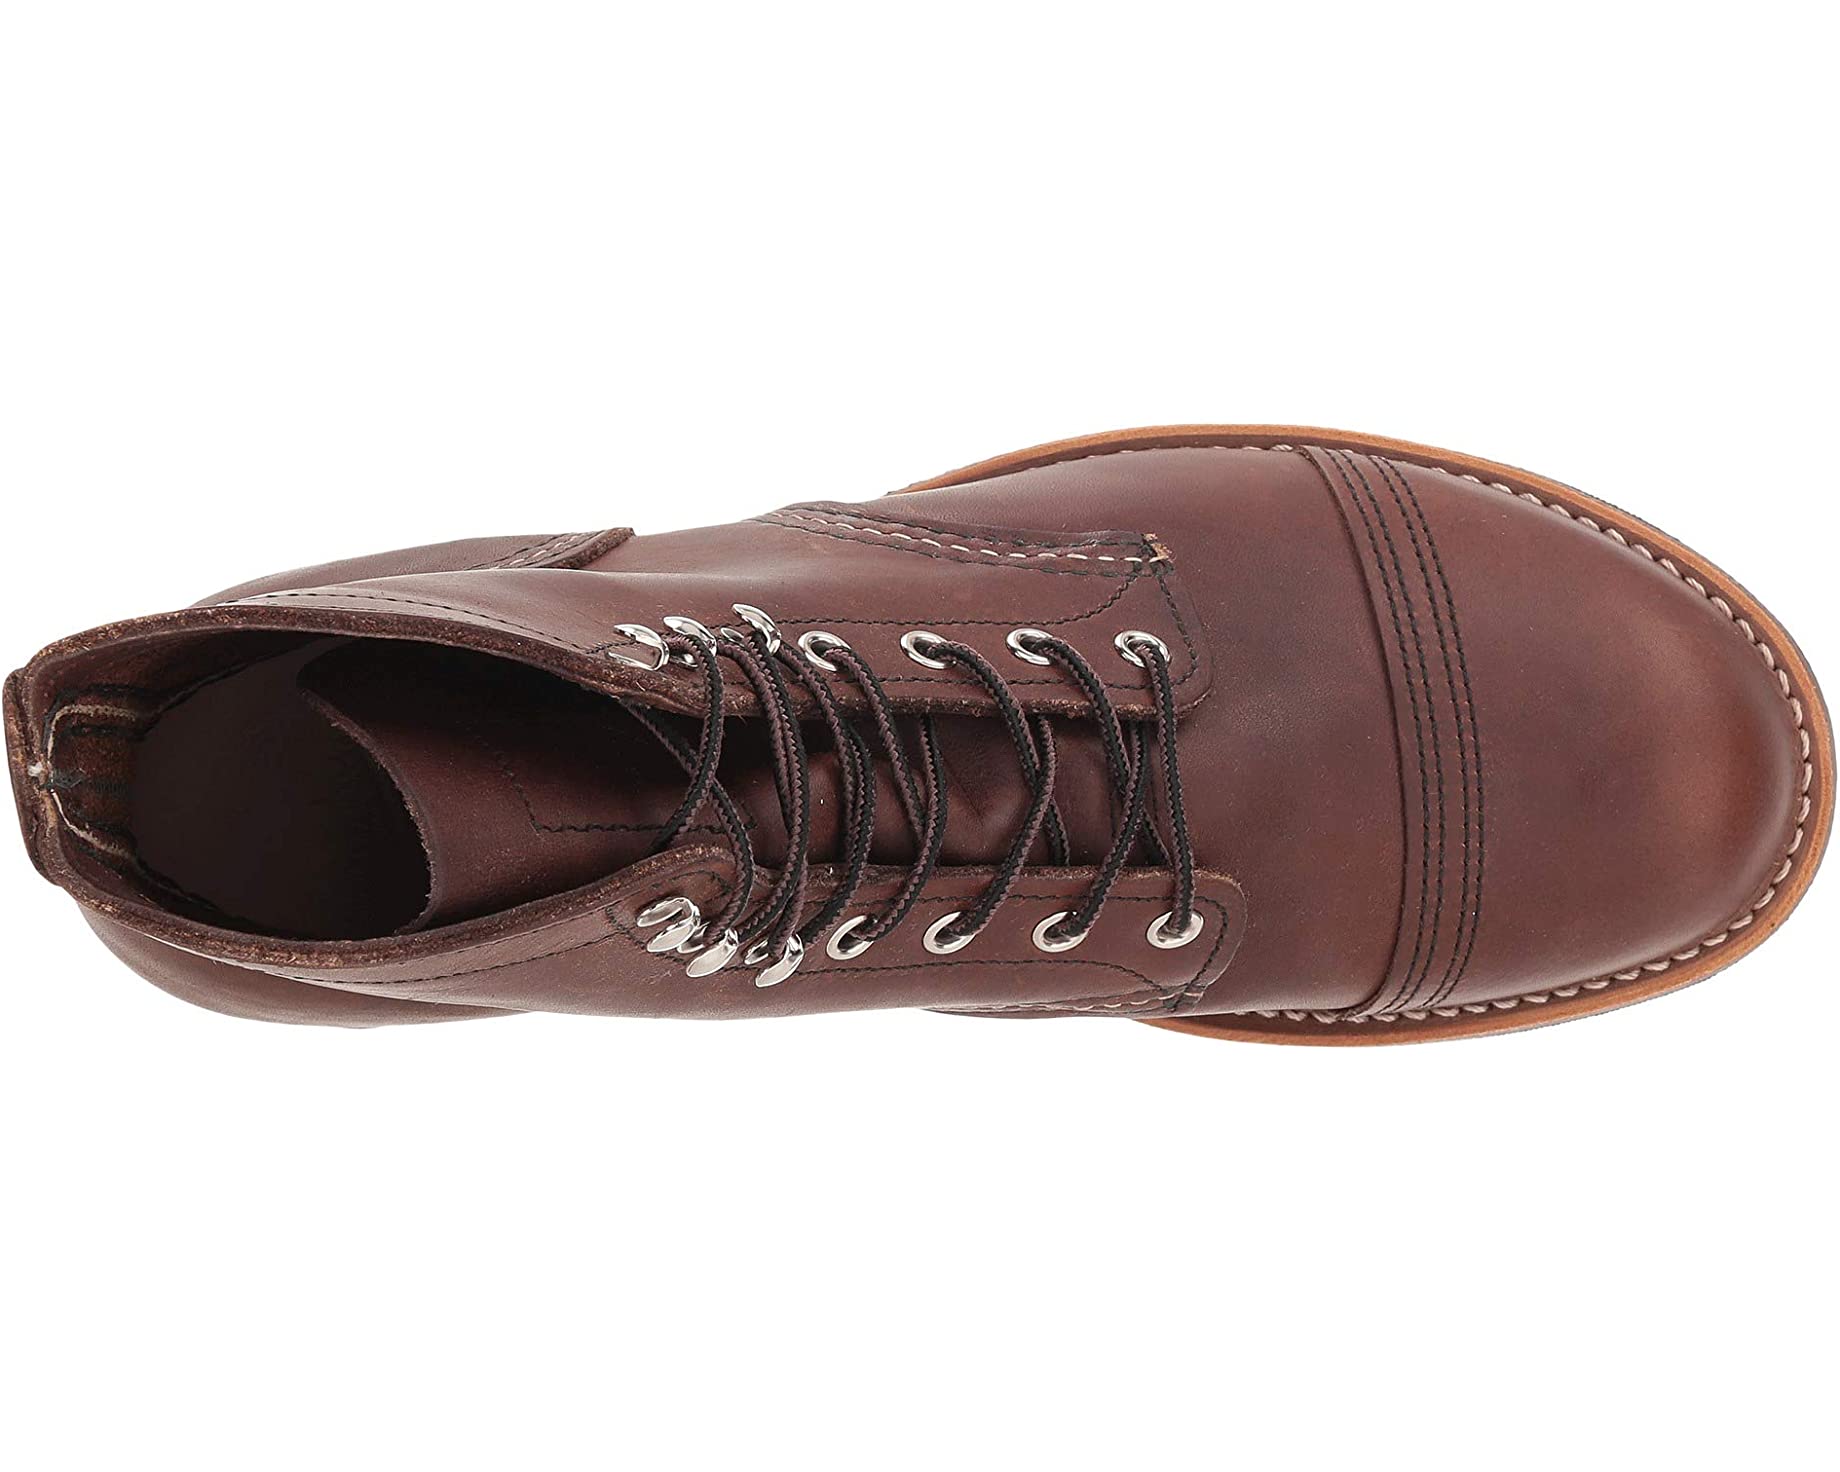 Ботинки 6 Iron Ranger Lug Red Wing Heritage, янтарная упряжь wing and wing or le feu follet